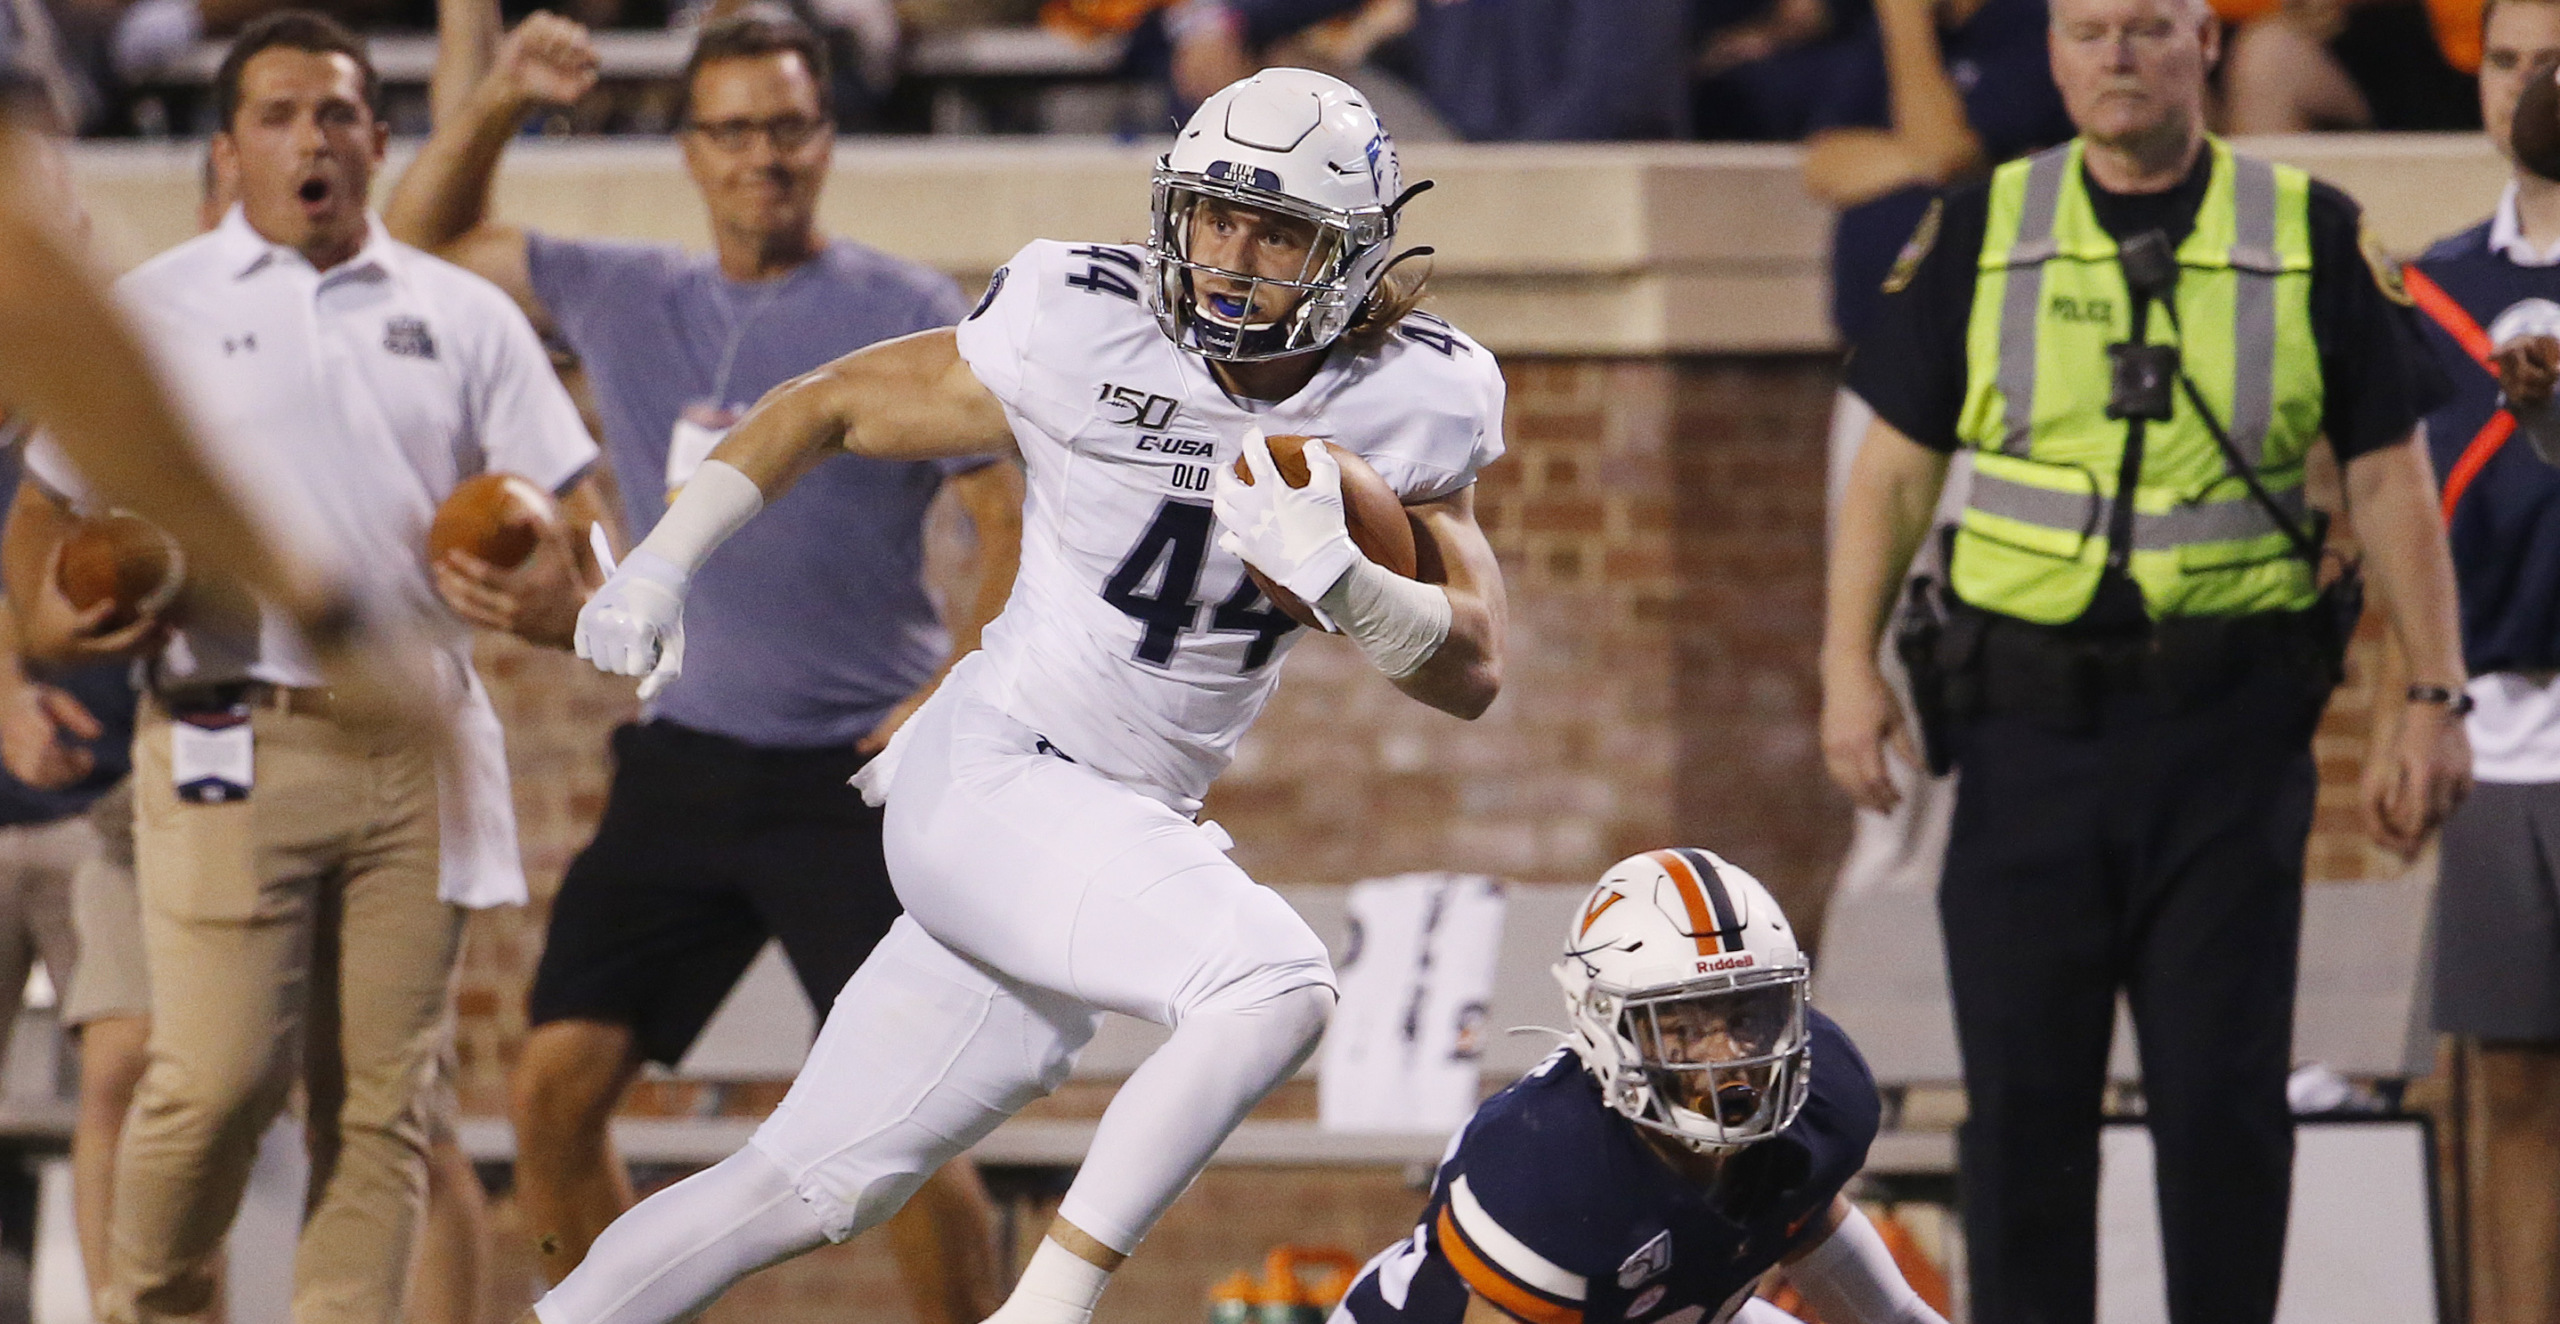 Old Dominion's Decision to Break From Conference, Sit Out Football